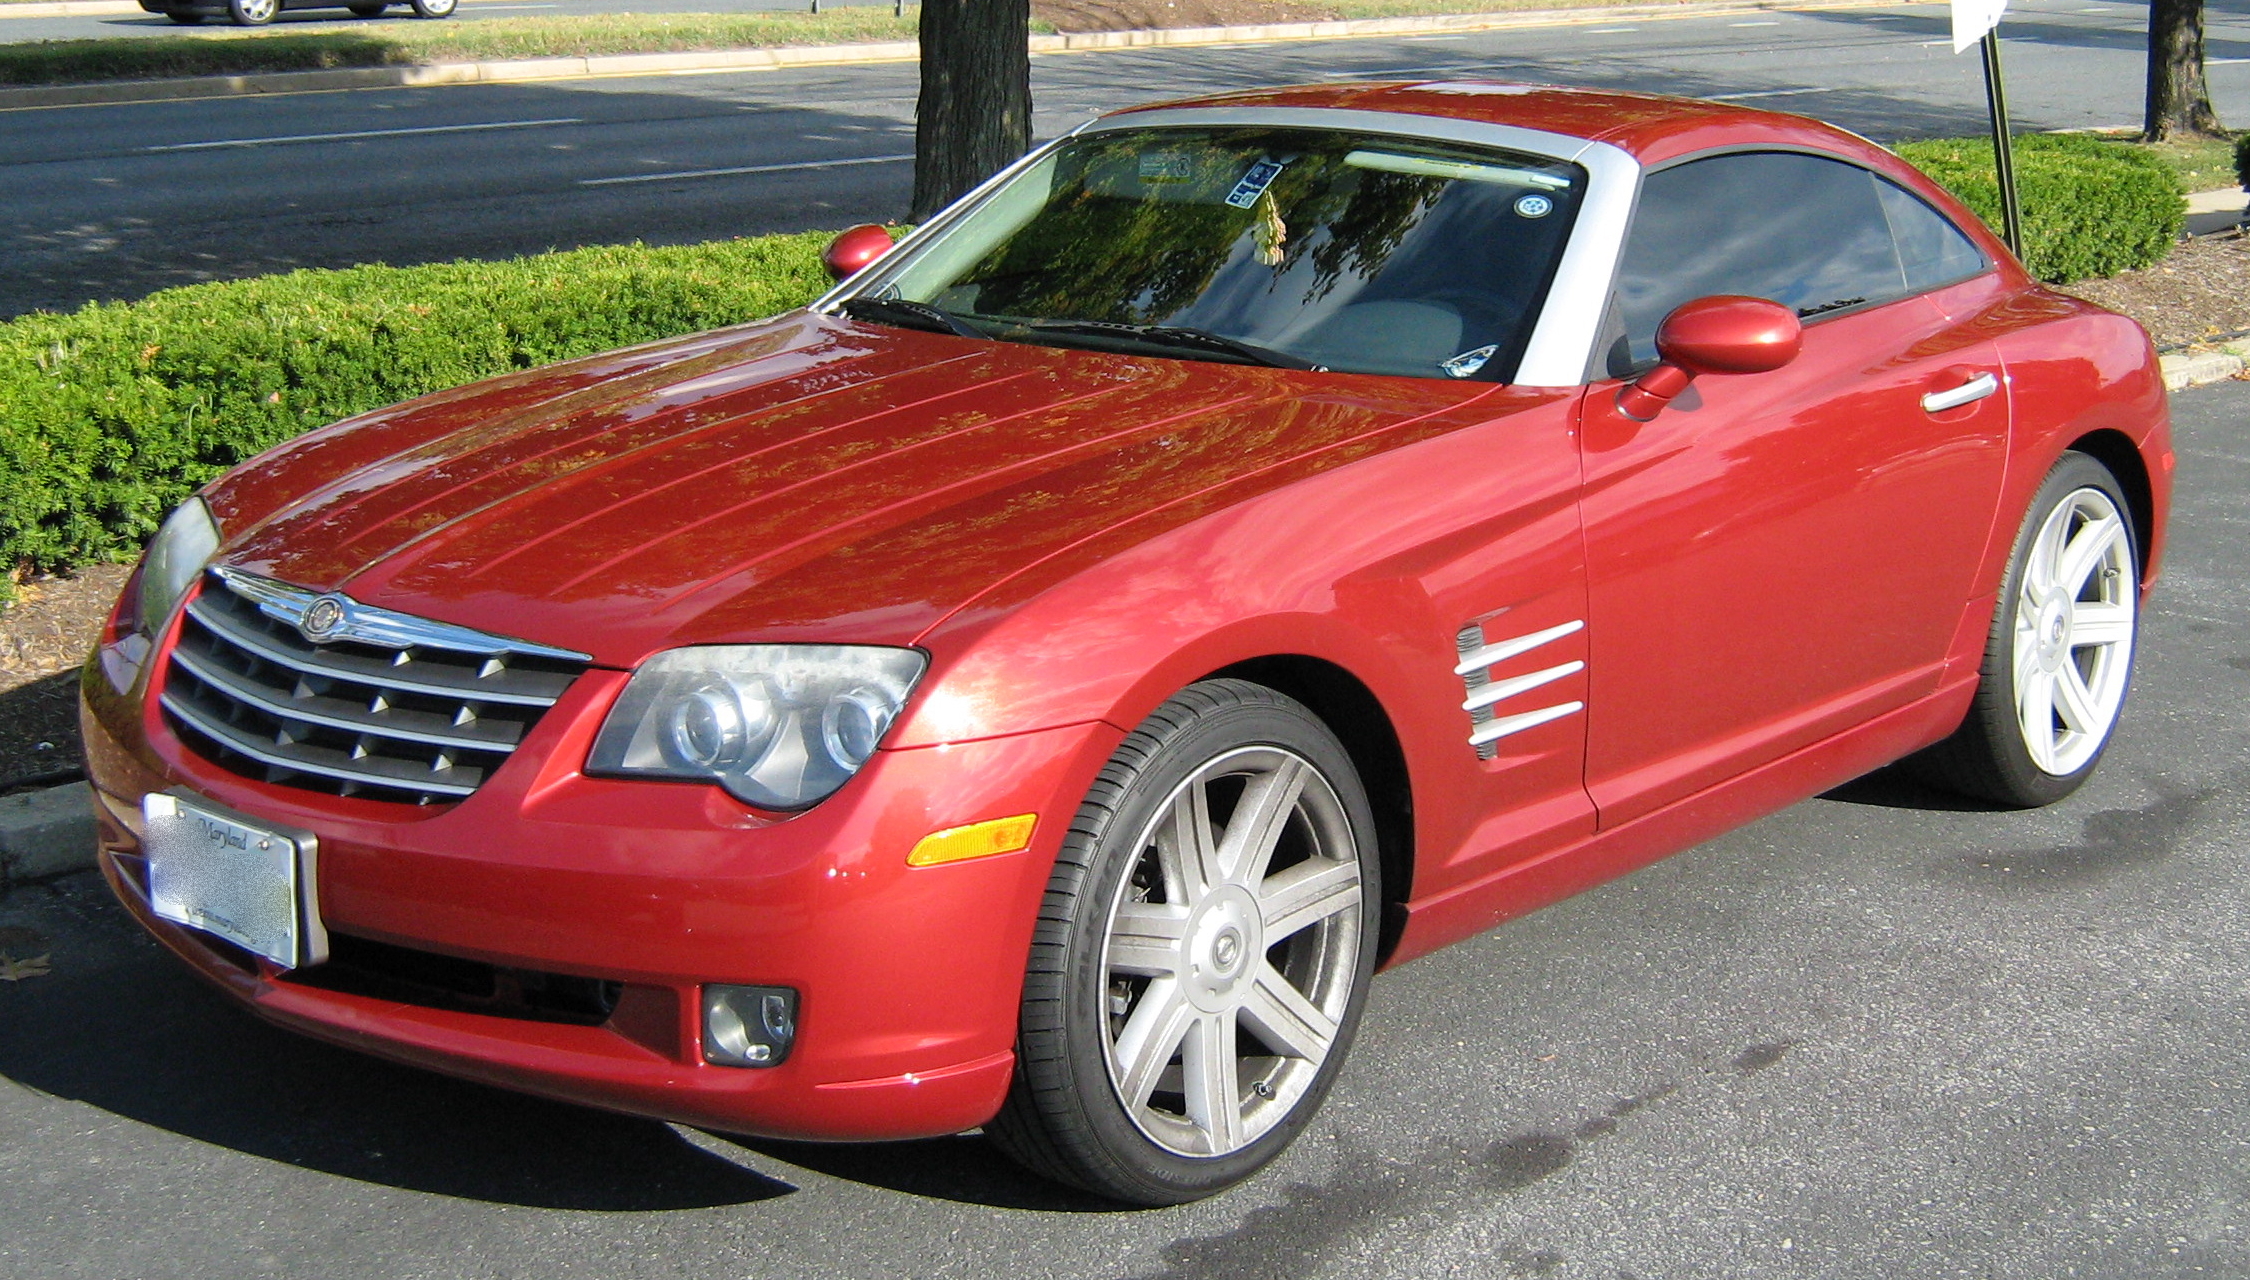 File:Chrysler Crossfire Red Coupe1.JPG - Wikimedia Commons